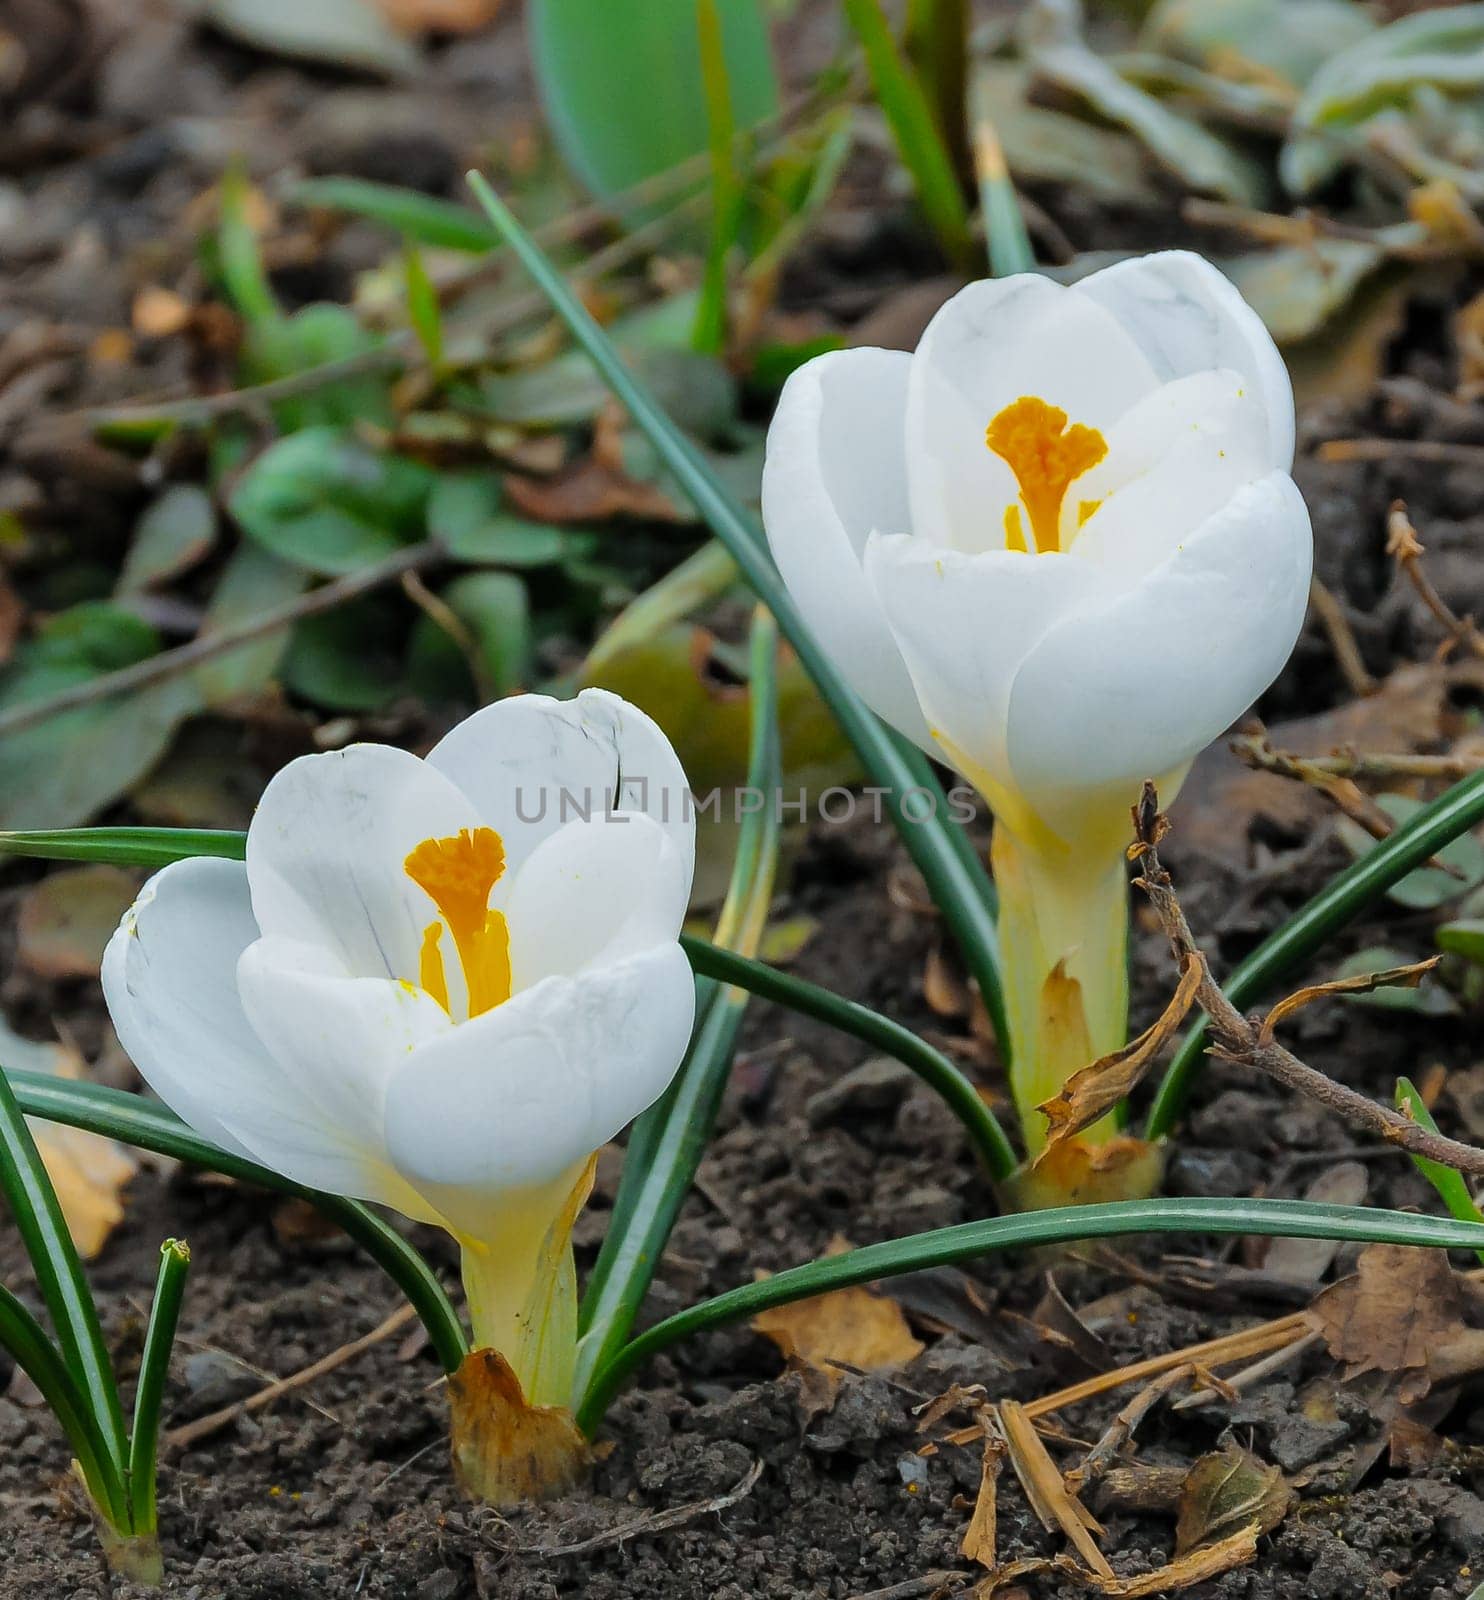 Early flowering garden plant Crocus with white flowers by Hydrobiolog